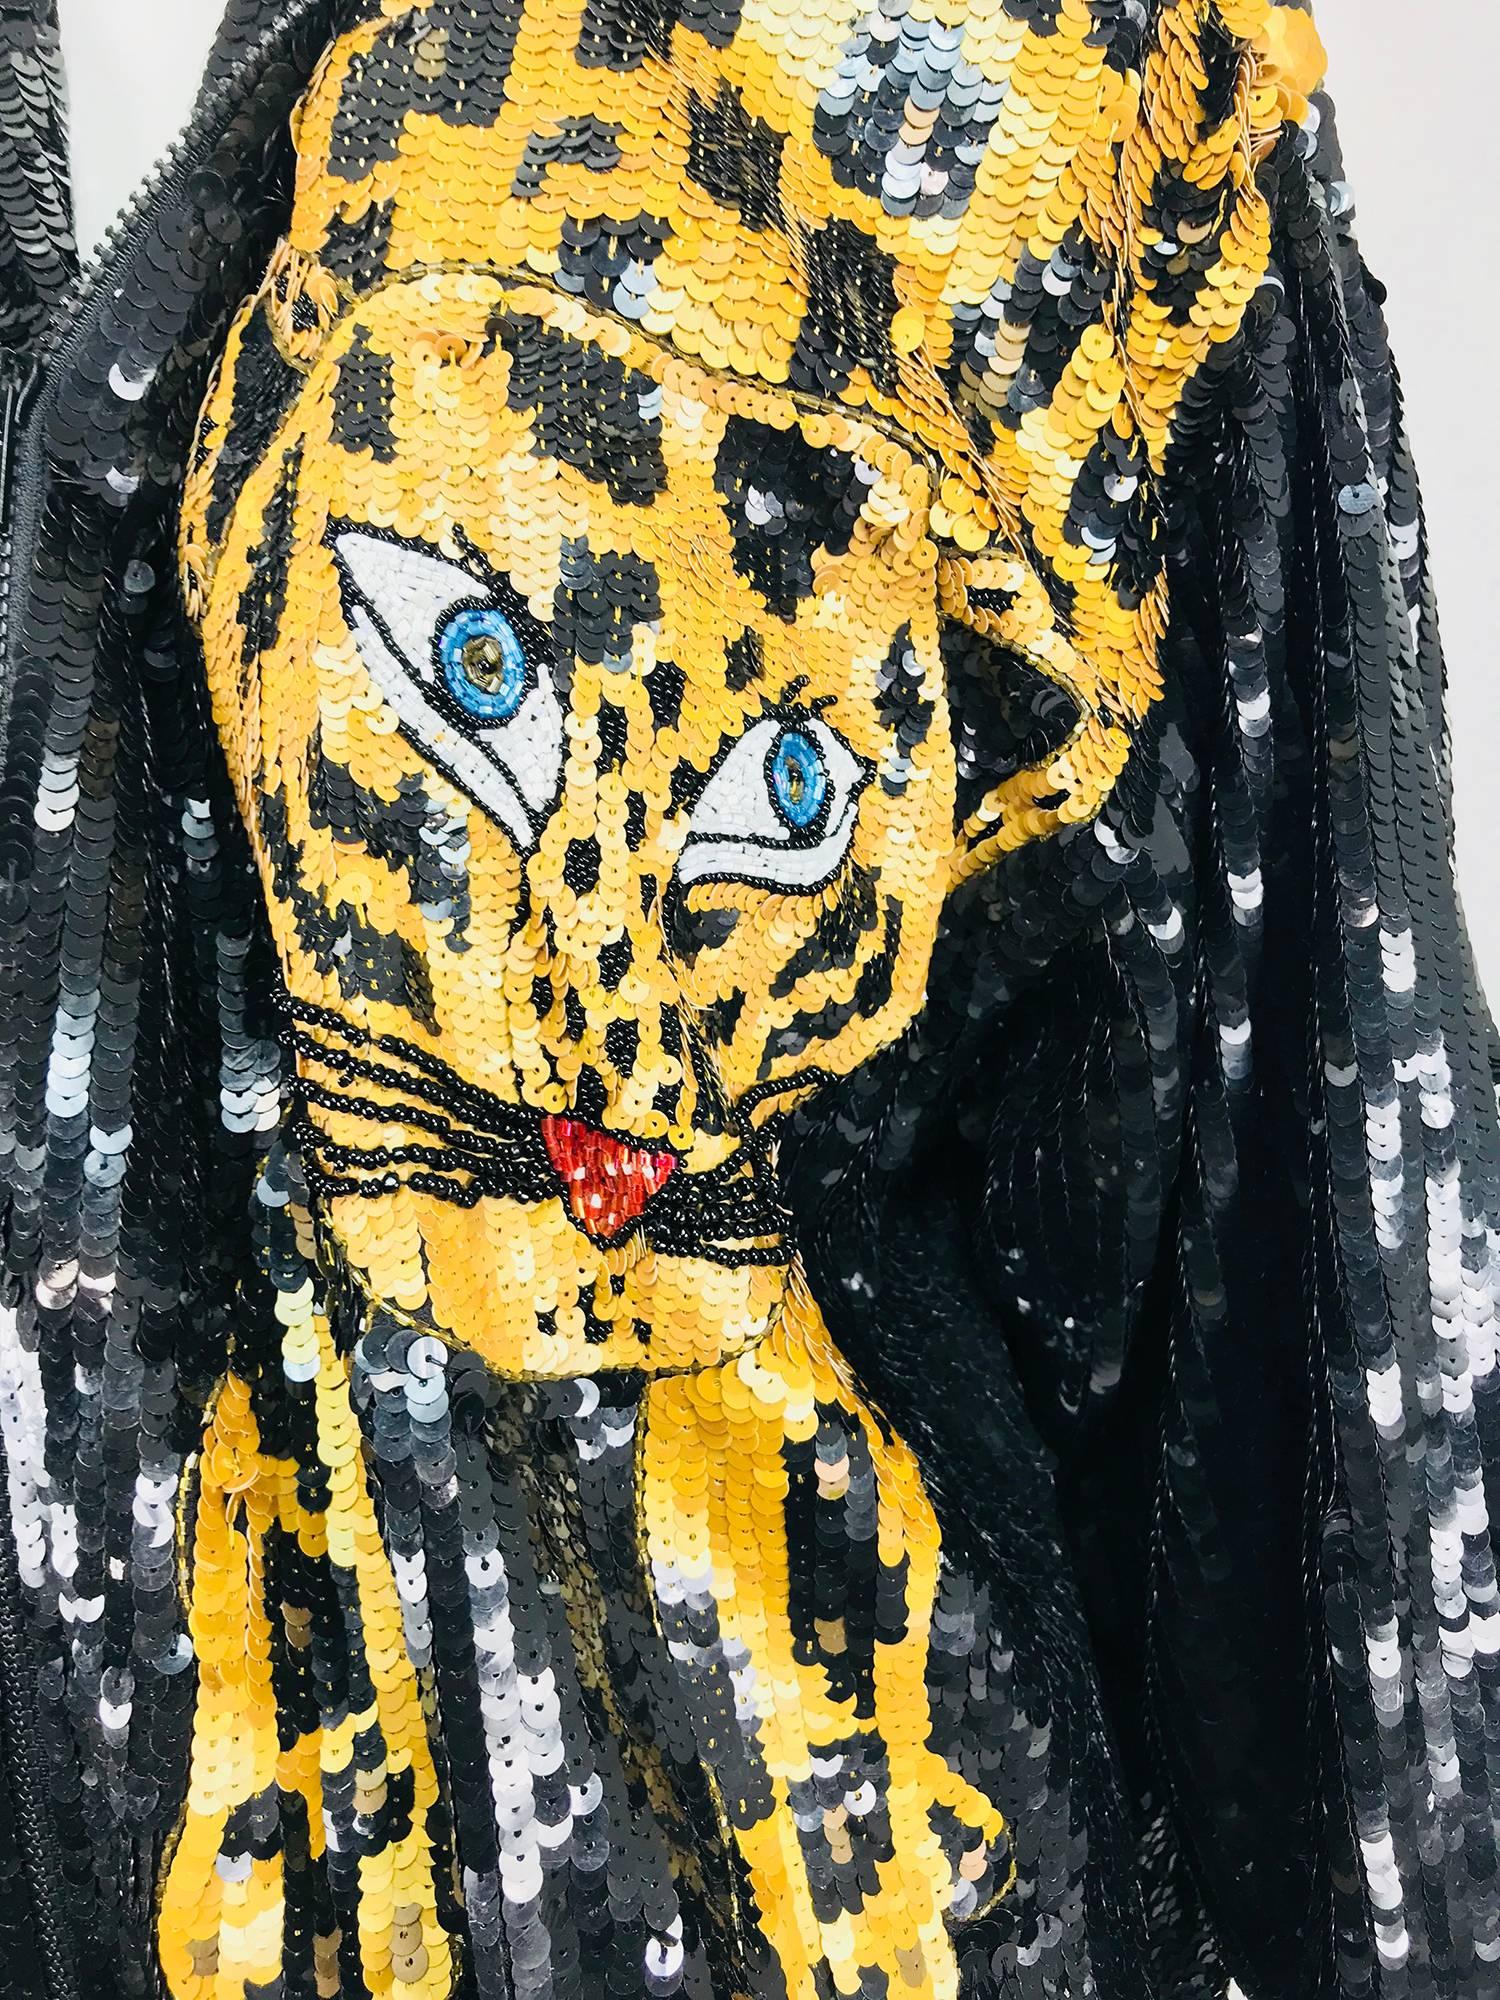 Modi novelty sequined leopard bomber jacket from the 1980s...Completely covered in sequins this jacket features a blue eyed leopard displayed over one shoulder with his rear and tail on the back of the jacket...Oversized with padded shoulders, 3/4